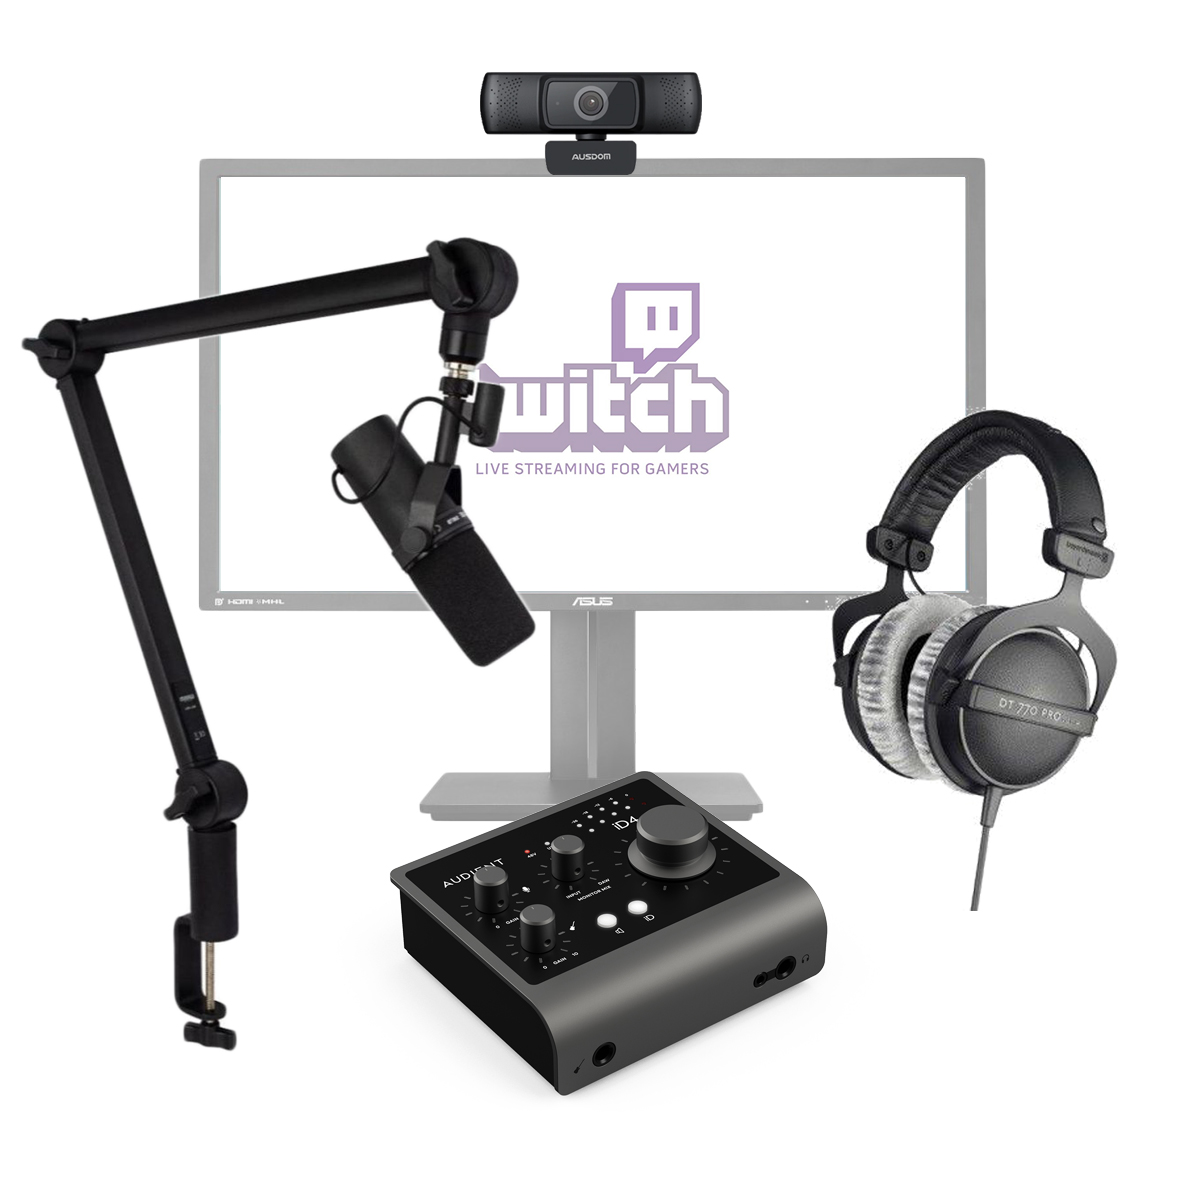 PACK-TWITCH-PRO Pack professionnel pour streamer 1 micro SM7B 1